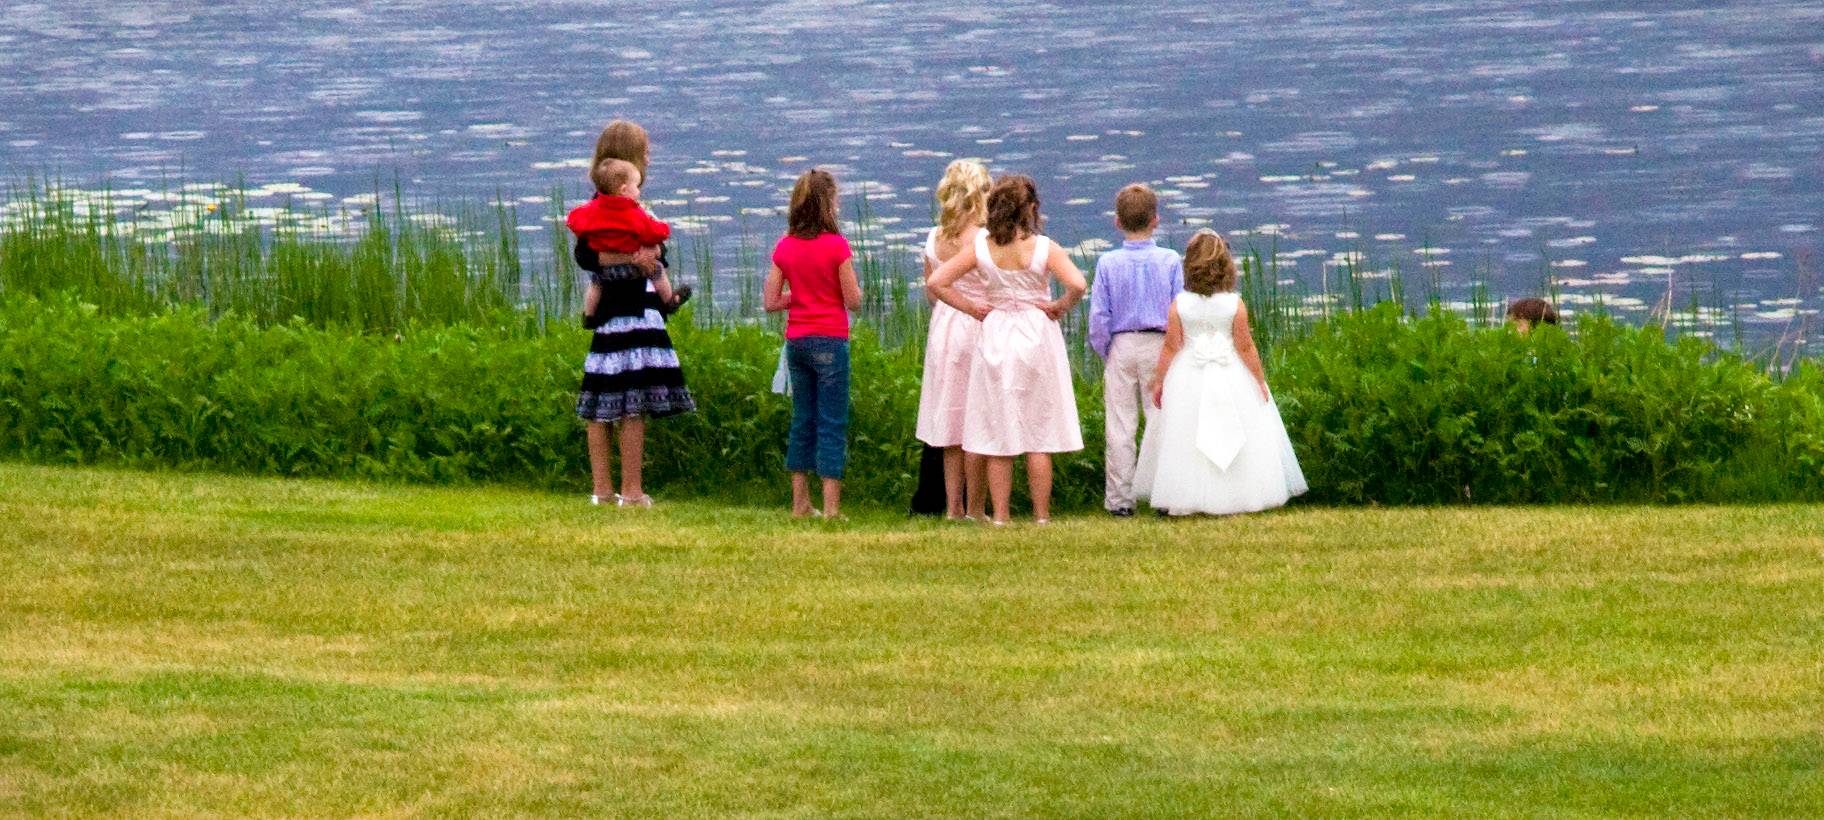 Children of the wedding party